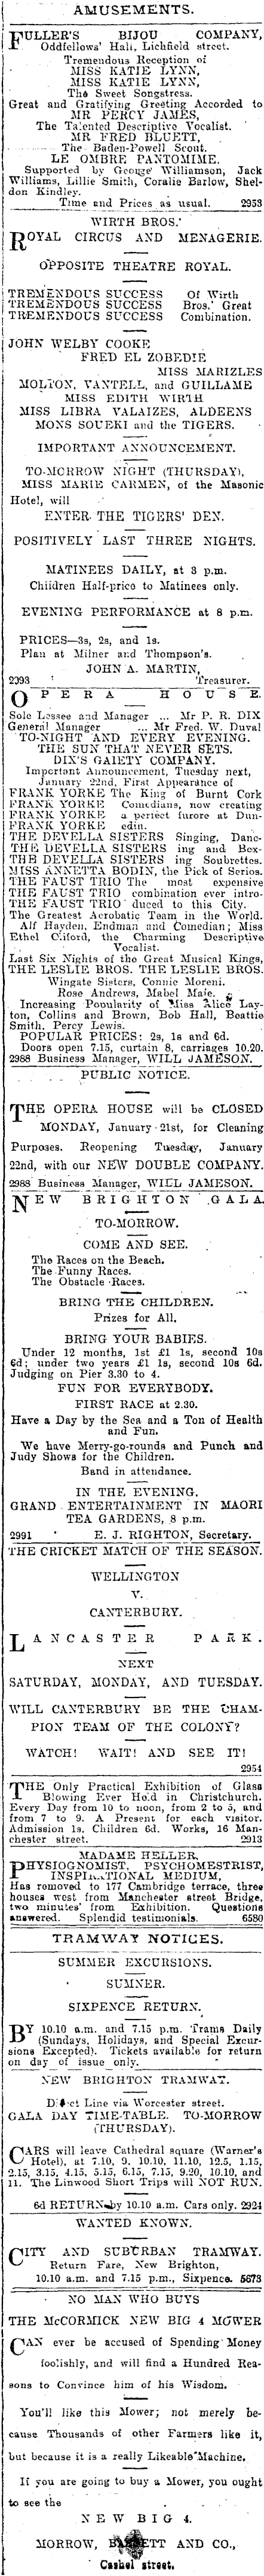 Papers Past Newspapers Press 16 January 1901 Page 1 Advertisements Column 6